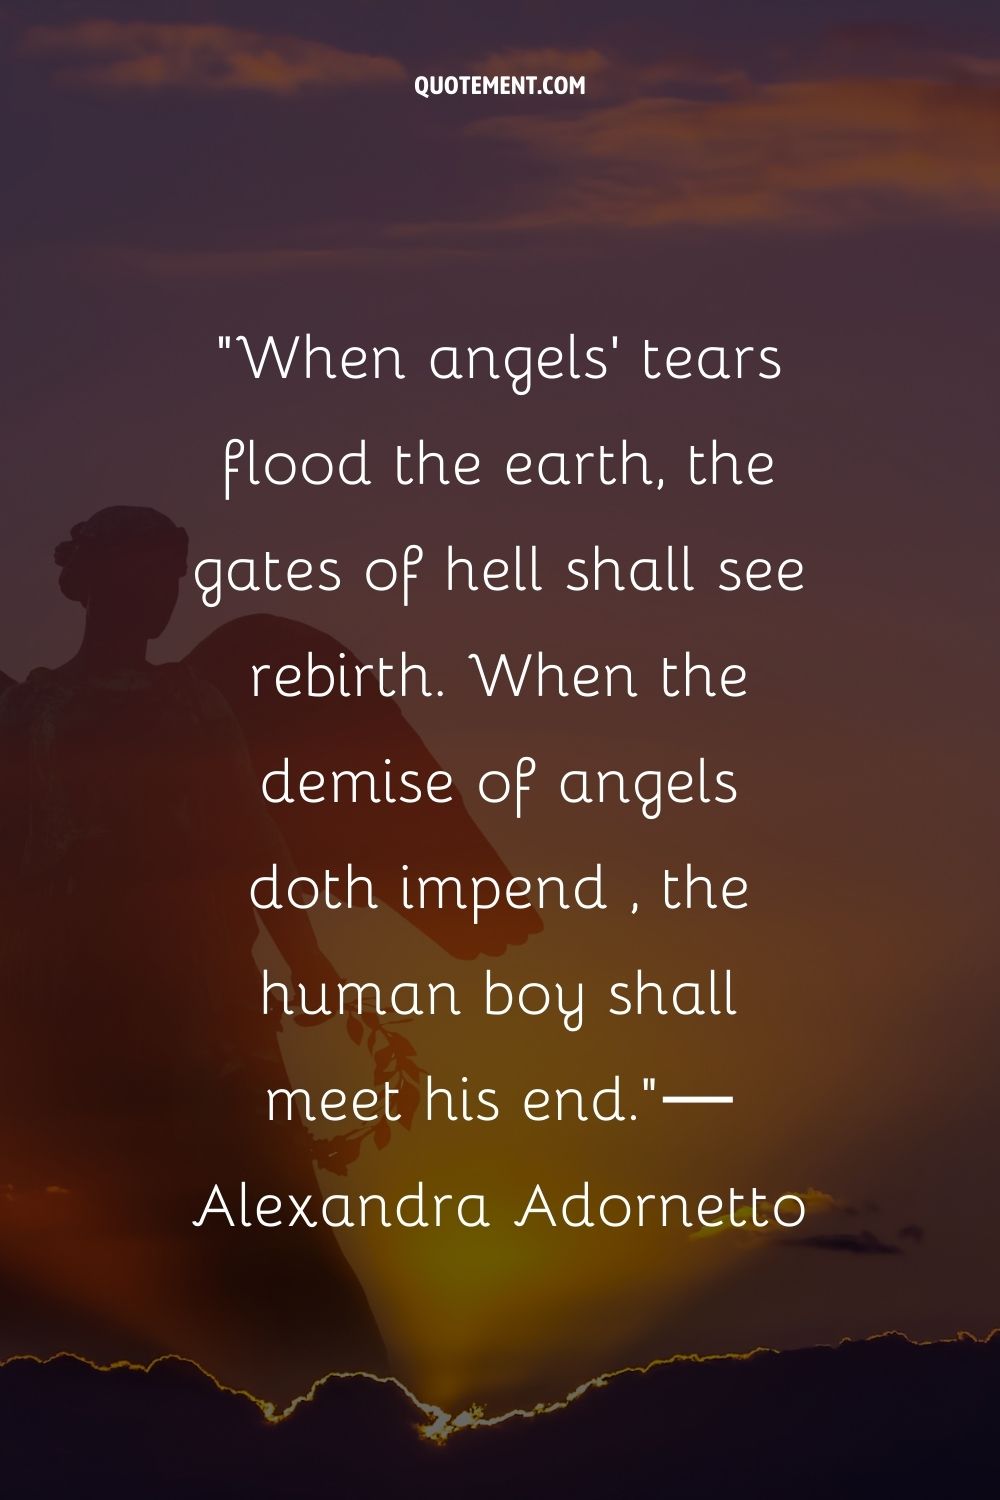 When angels' tears flood the earth, the gates of hell shall see rebirth.